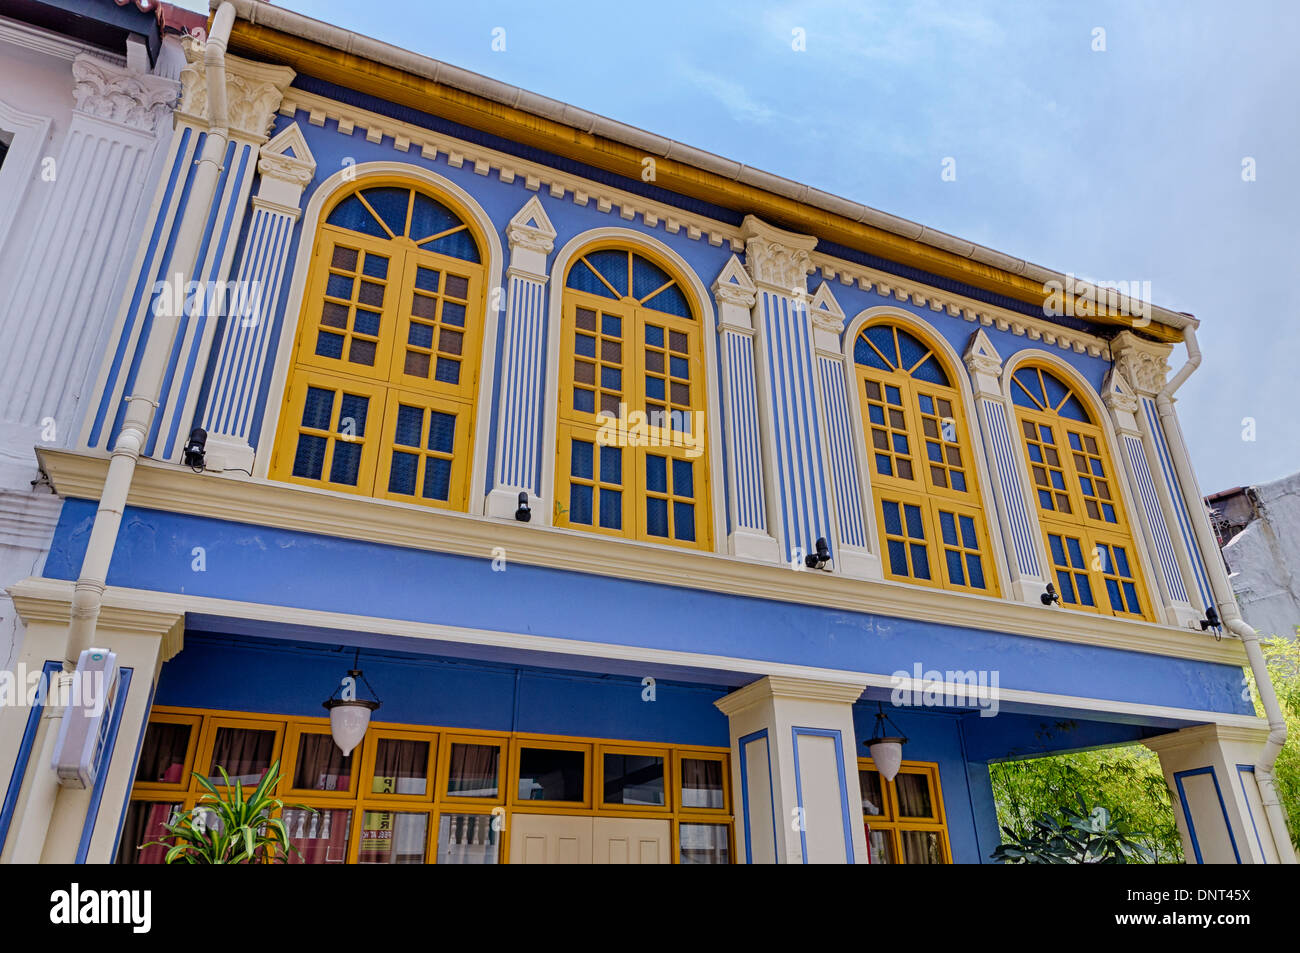 Colorful Building in Kampong Glam, Singapore Stock Photo